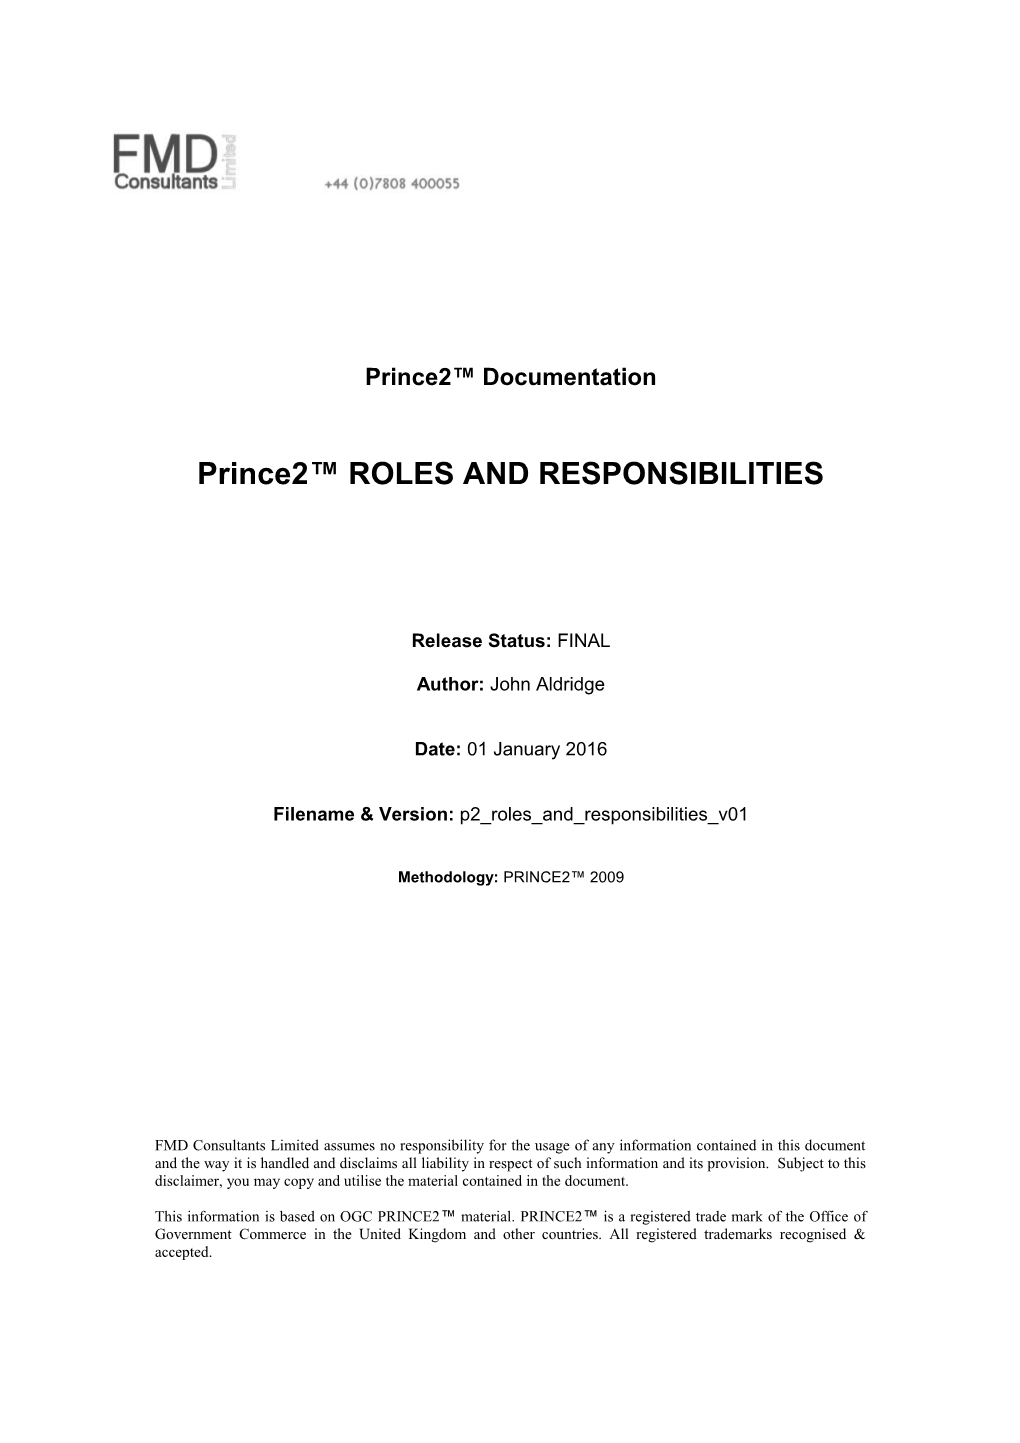 Prince2 Roles and Responsibilities